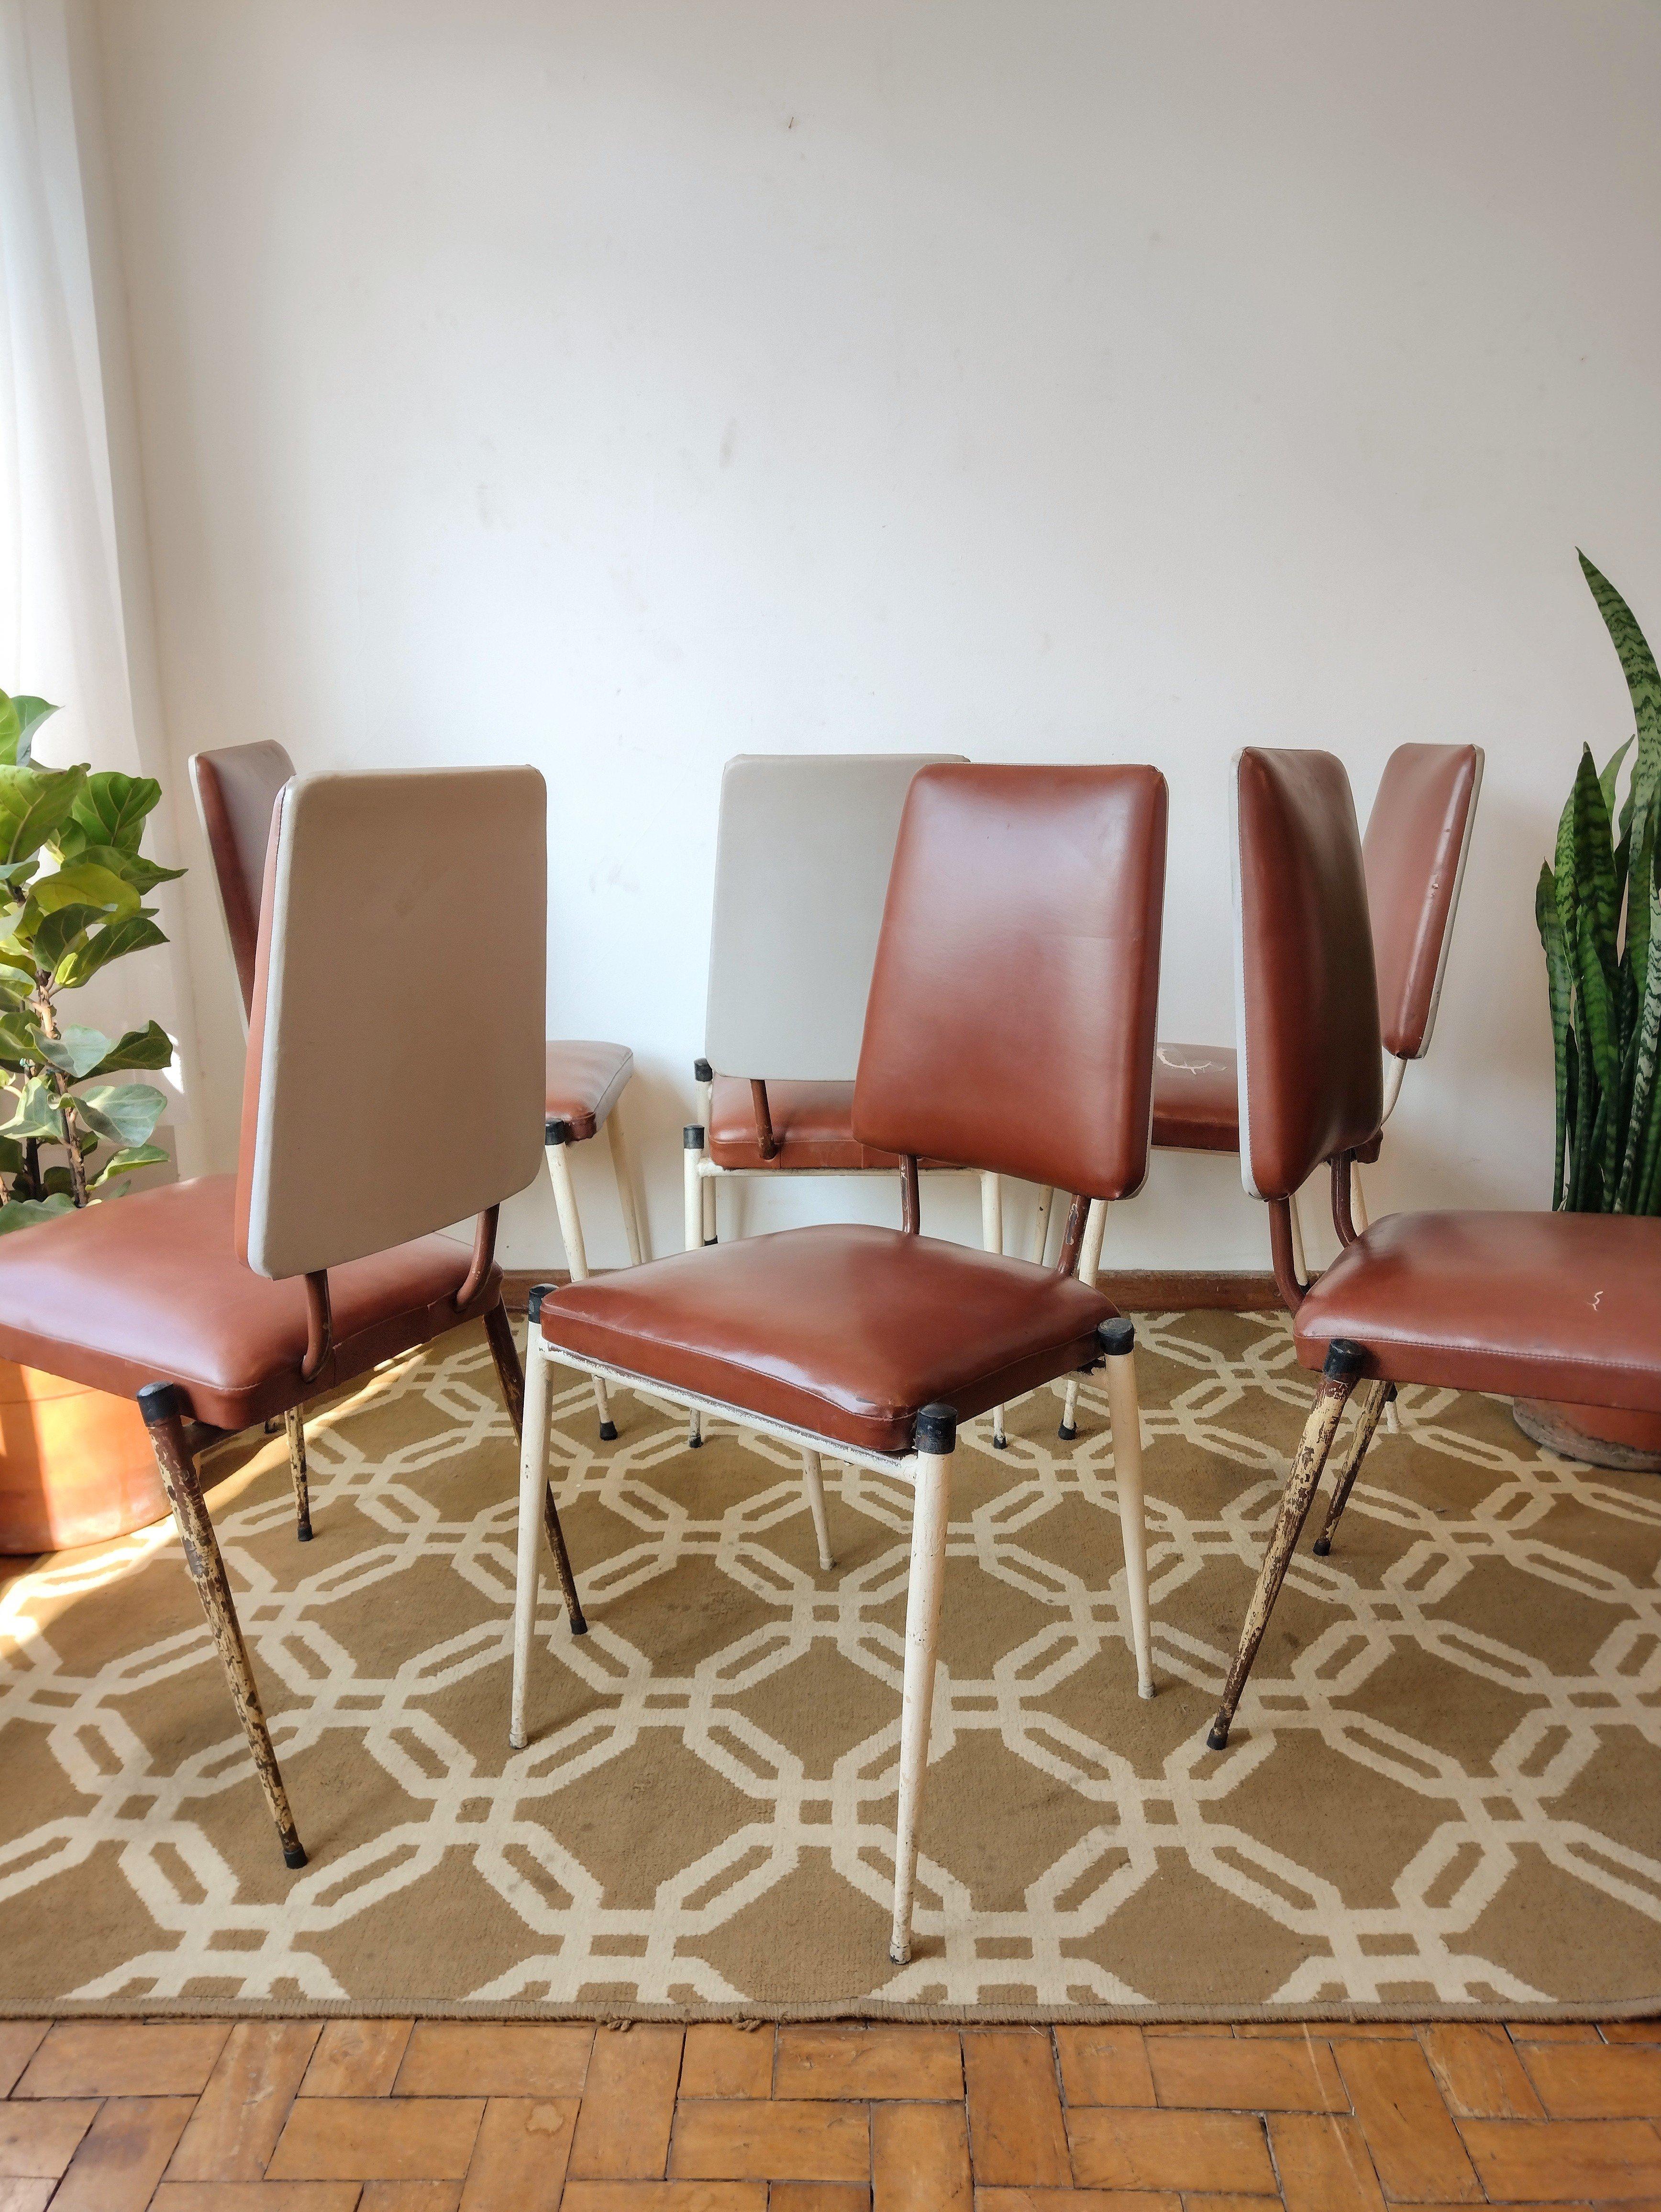 Set of 6 Mid-Century Modern Brazilian Brown and Gray chairs with iron structure painted in offwhite and seat/backrest covered in brown and gray courvin (faux leather). Chair is comfortable and has a high and straight back, keeping the spine more